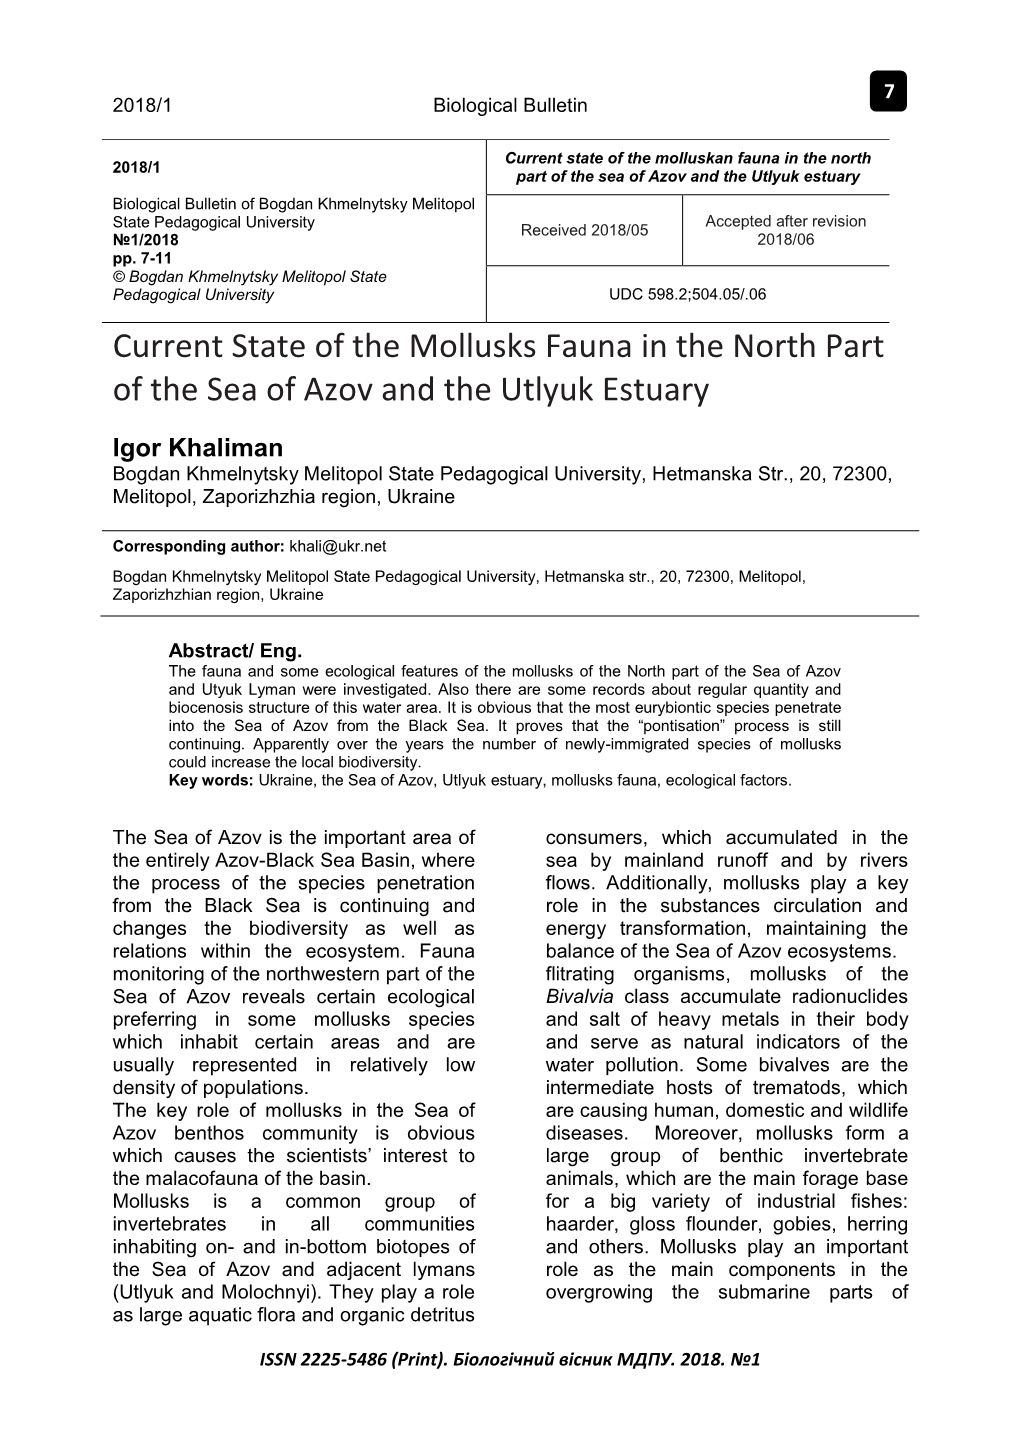 Сurrent State of the Mollusks Fauna in the North Part of the Sea of Azov and the Utlyuk Estuary